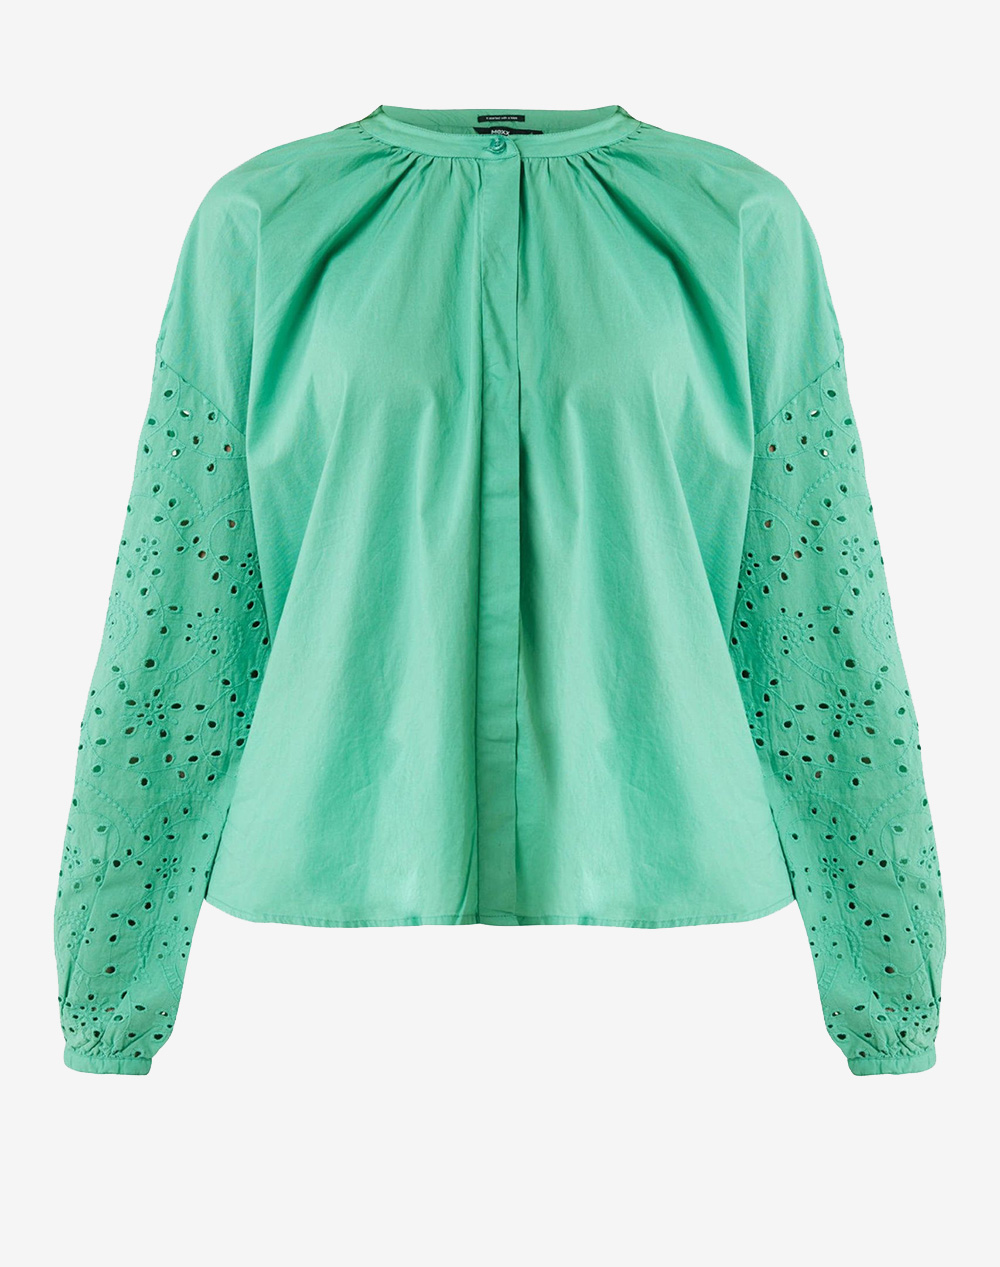 MEXX Blouse with embroidery sleeves and back MF006103041W-165930 Green 3810PMEXX3400188_XR31029